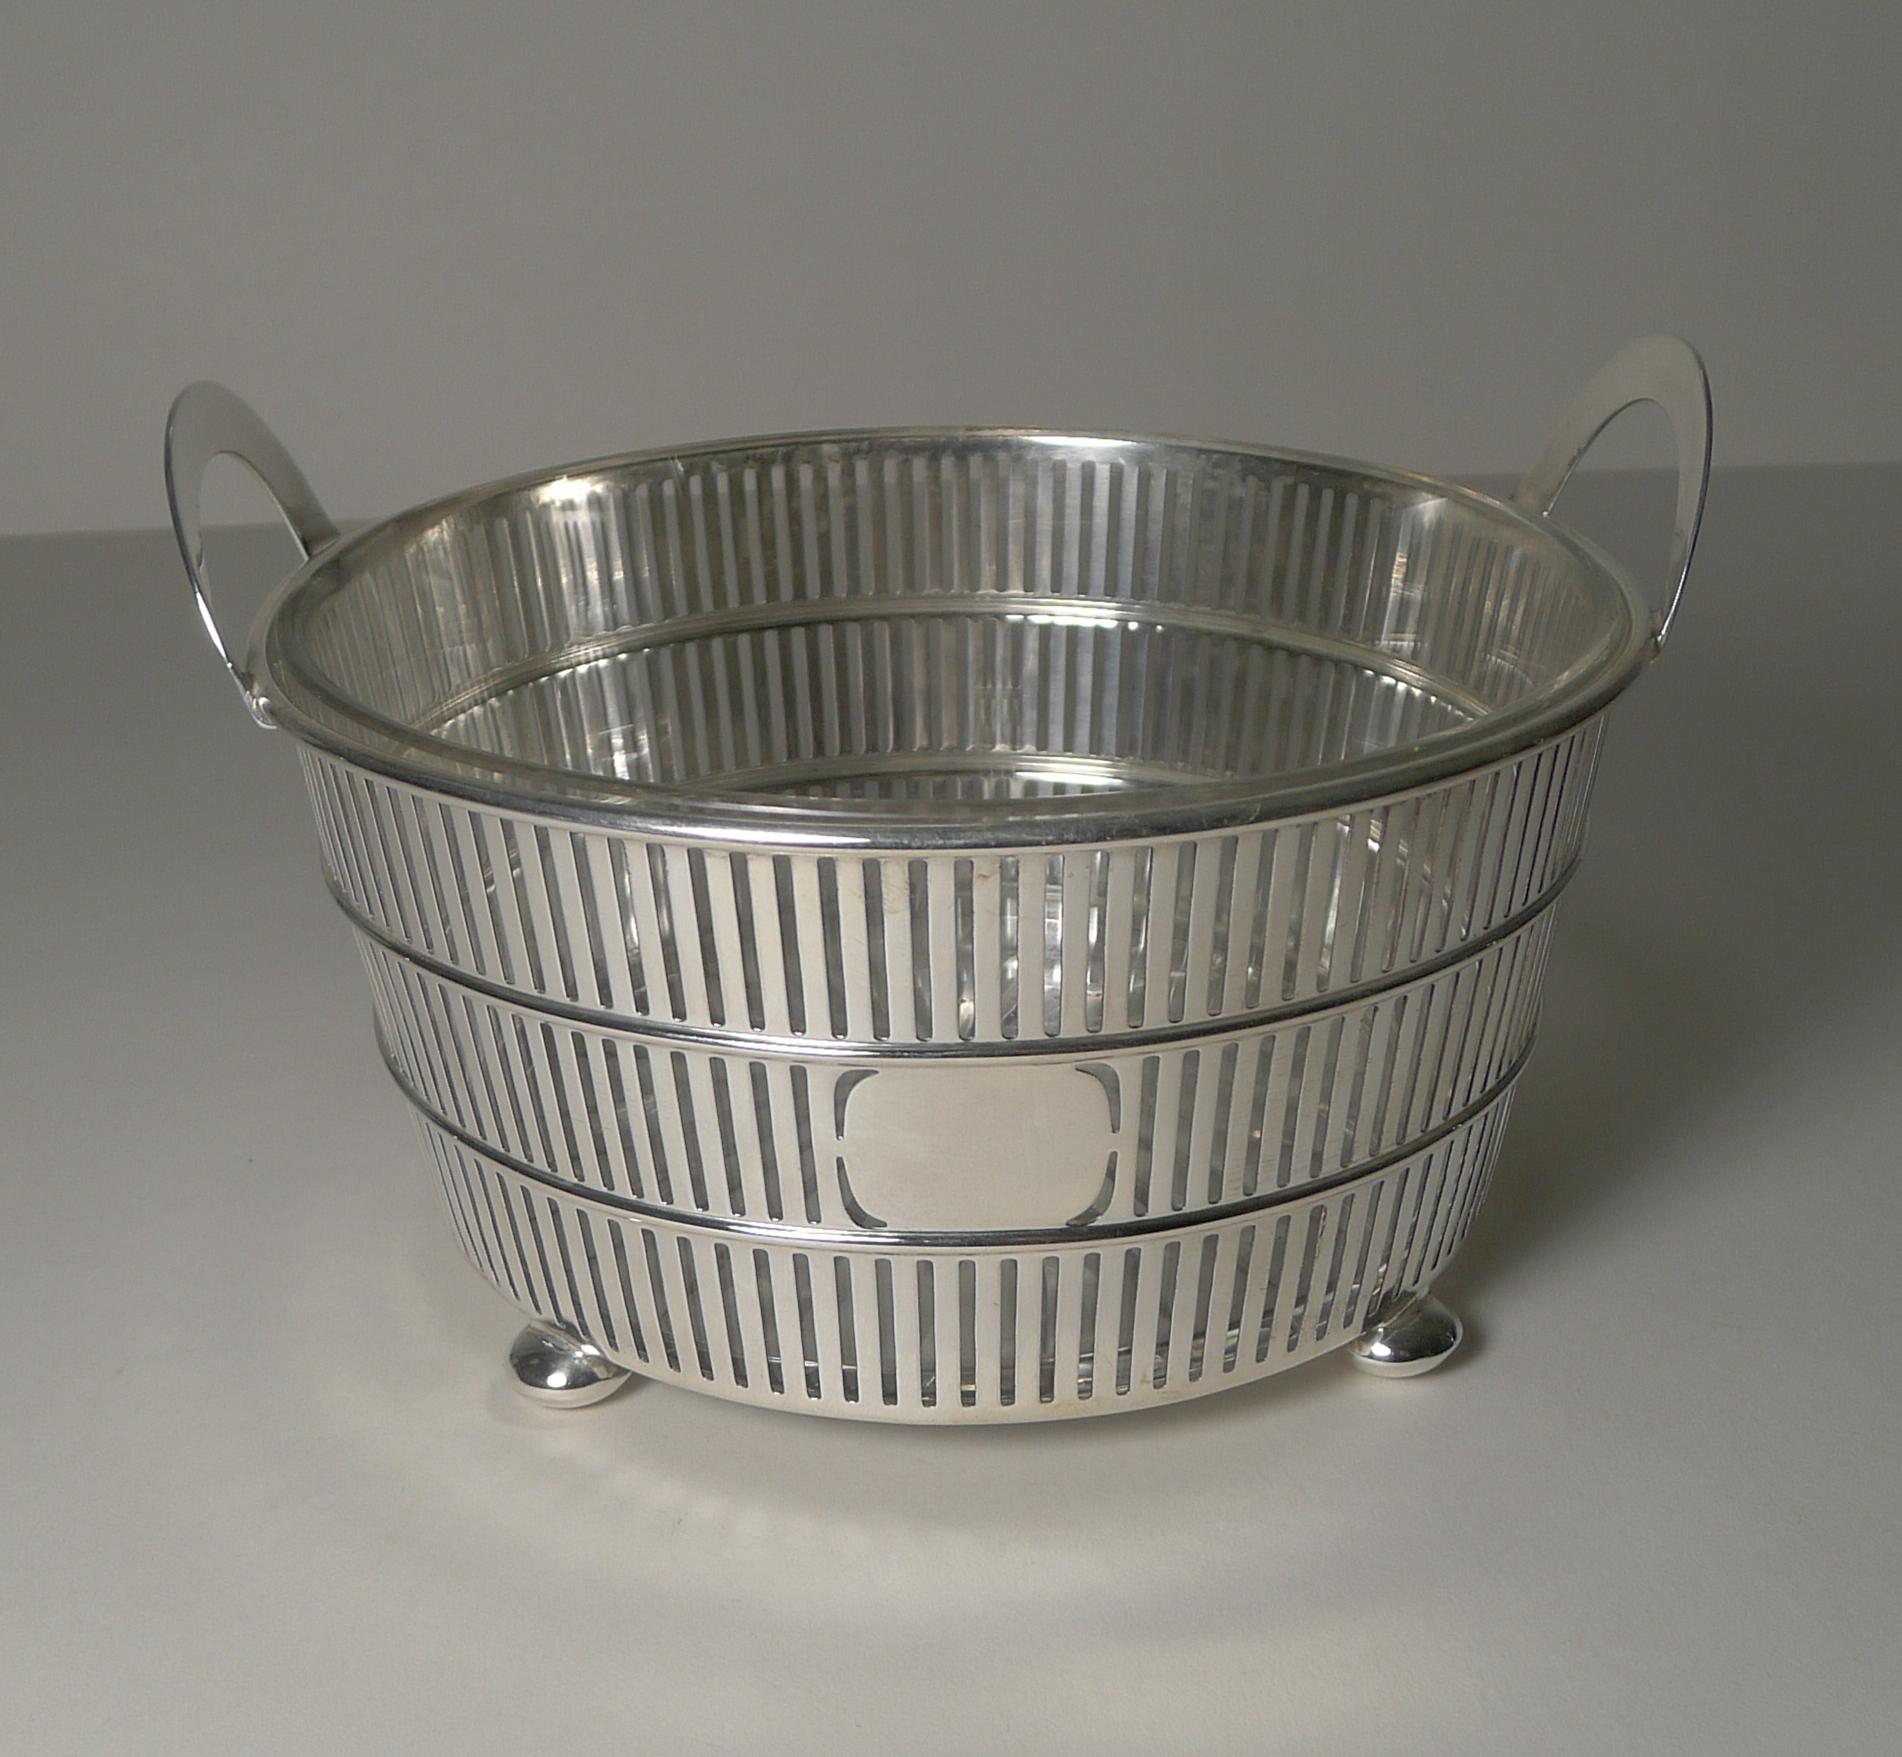 North American American Solid / Sterling Silver Ice Bowl / Bucket C.1920, Watson